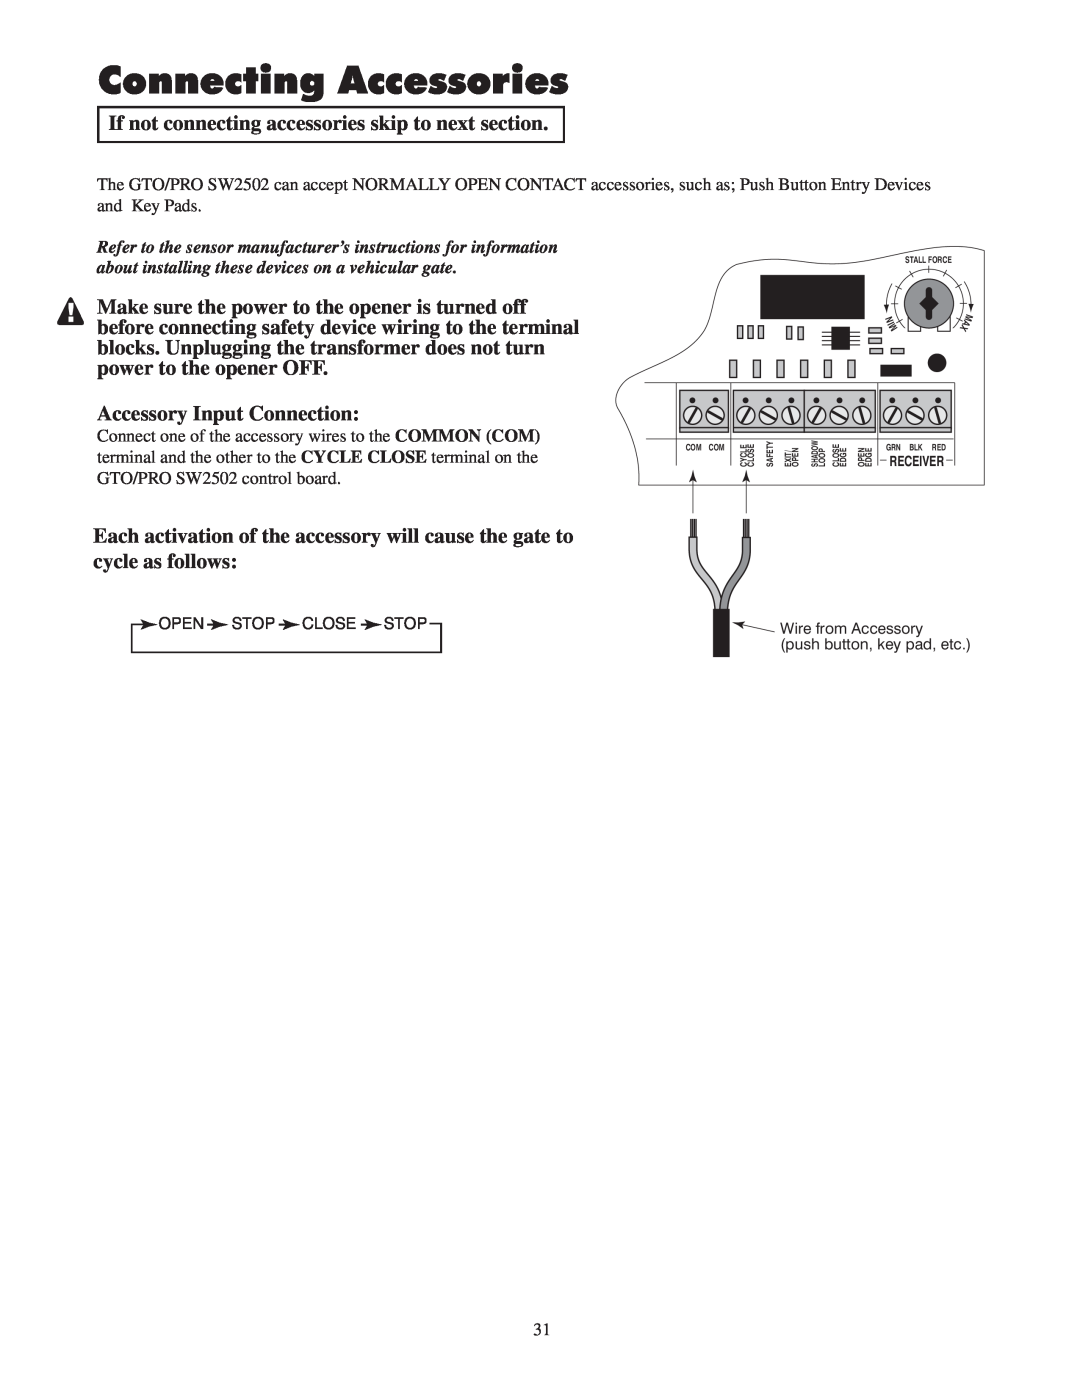 GTO 2502, 2550 installation manual Connecting Accessories 